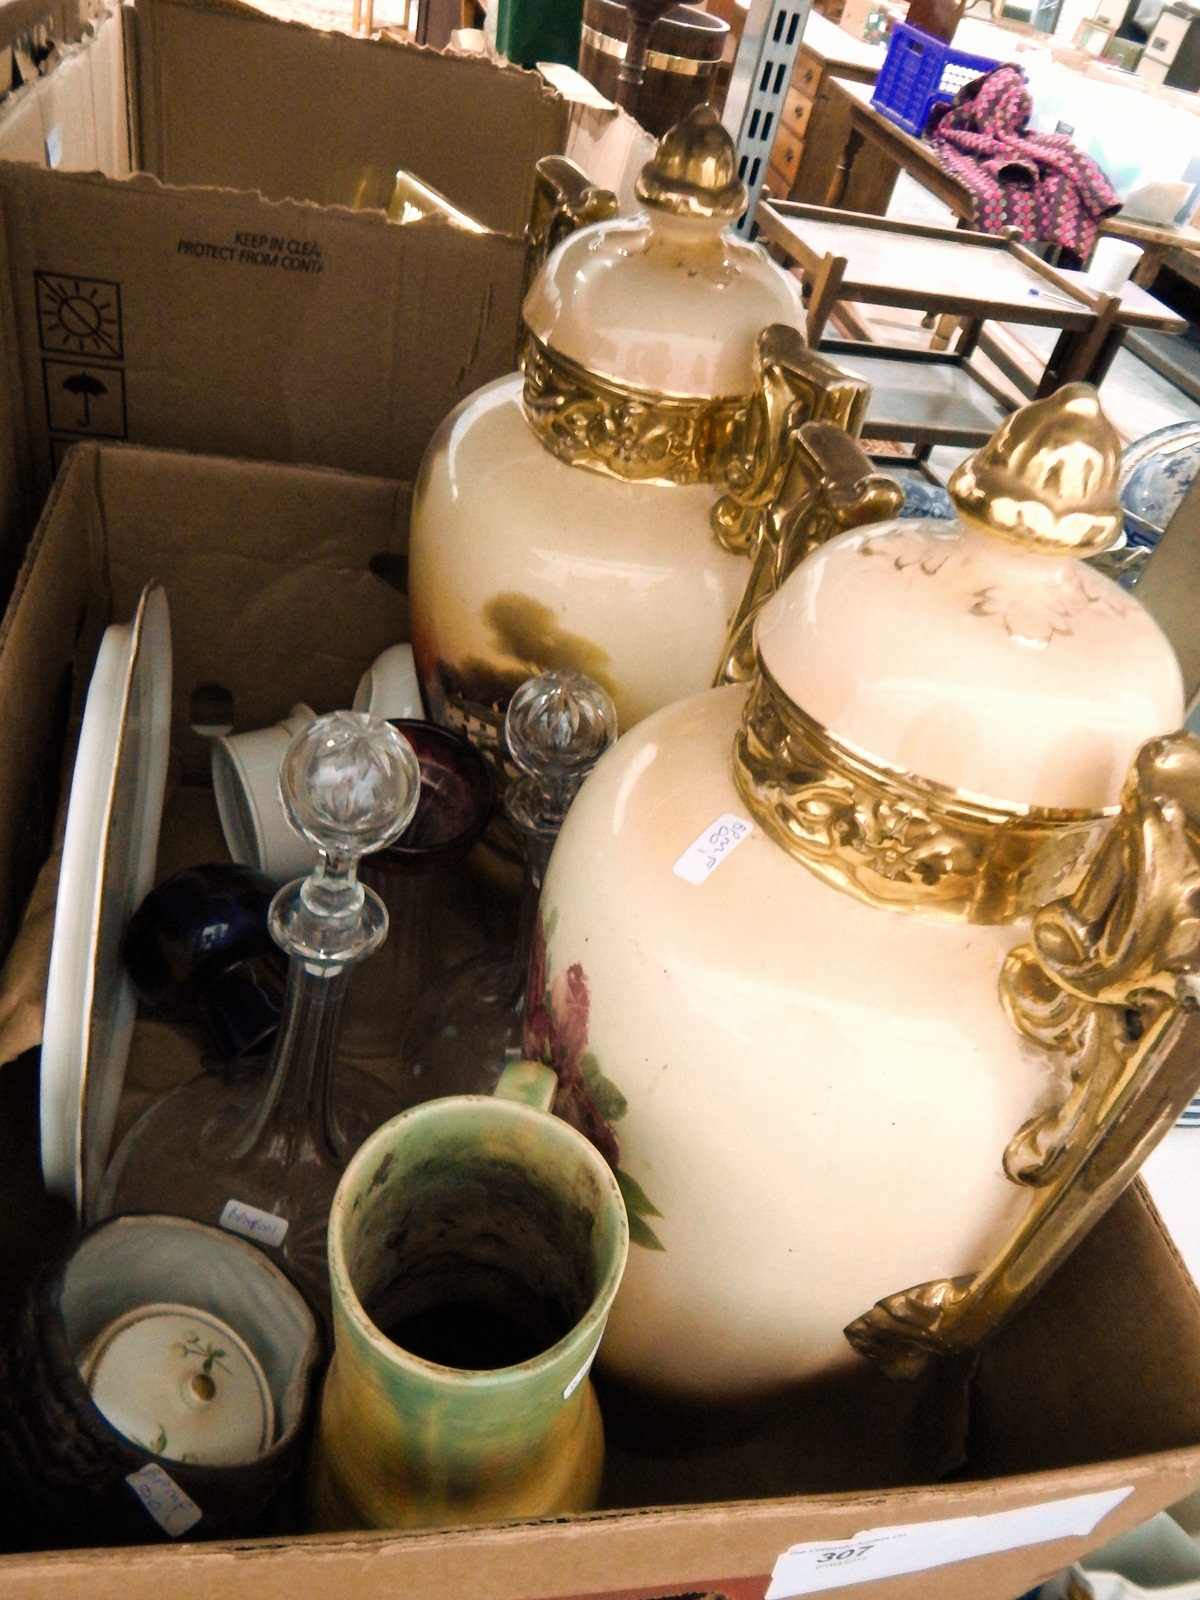 A pair of Victorian transfer printed decorated urns heavily gilded, a pair of glass decanters,